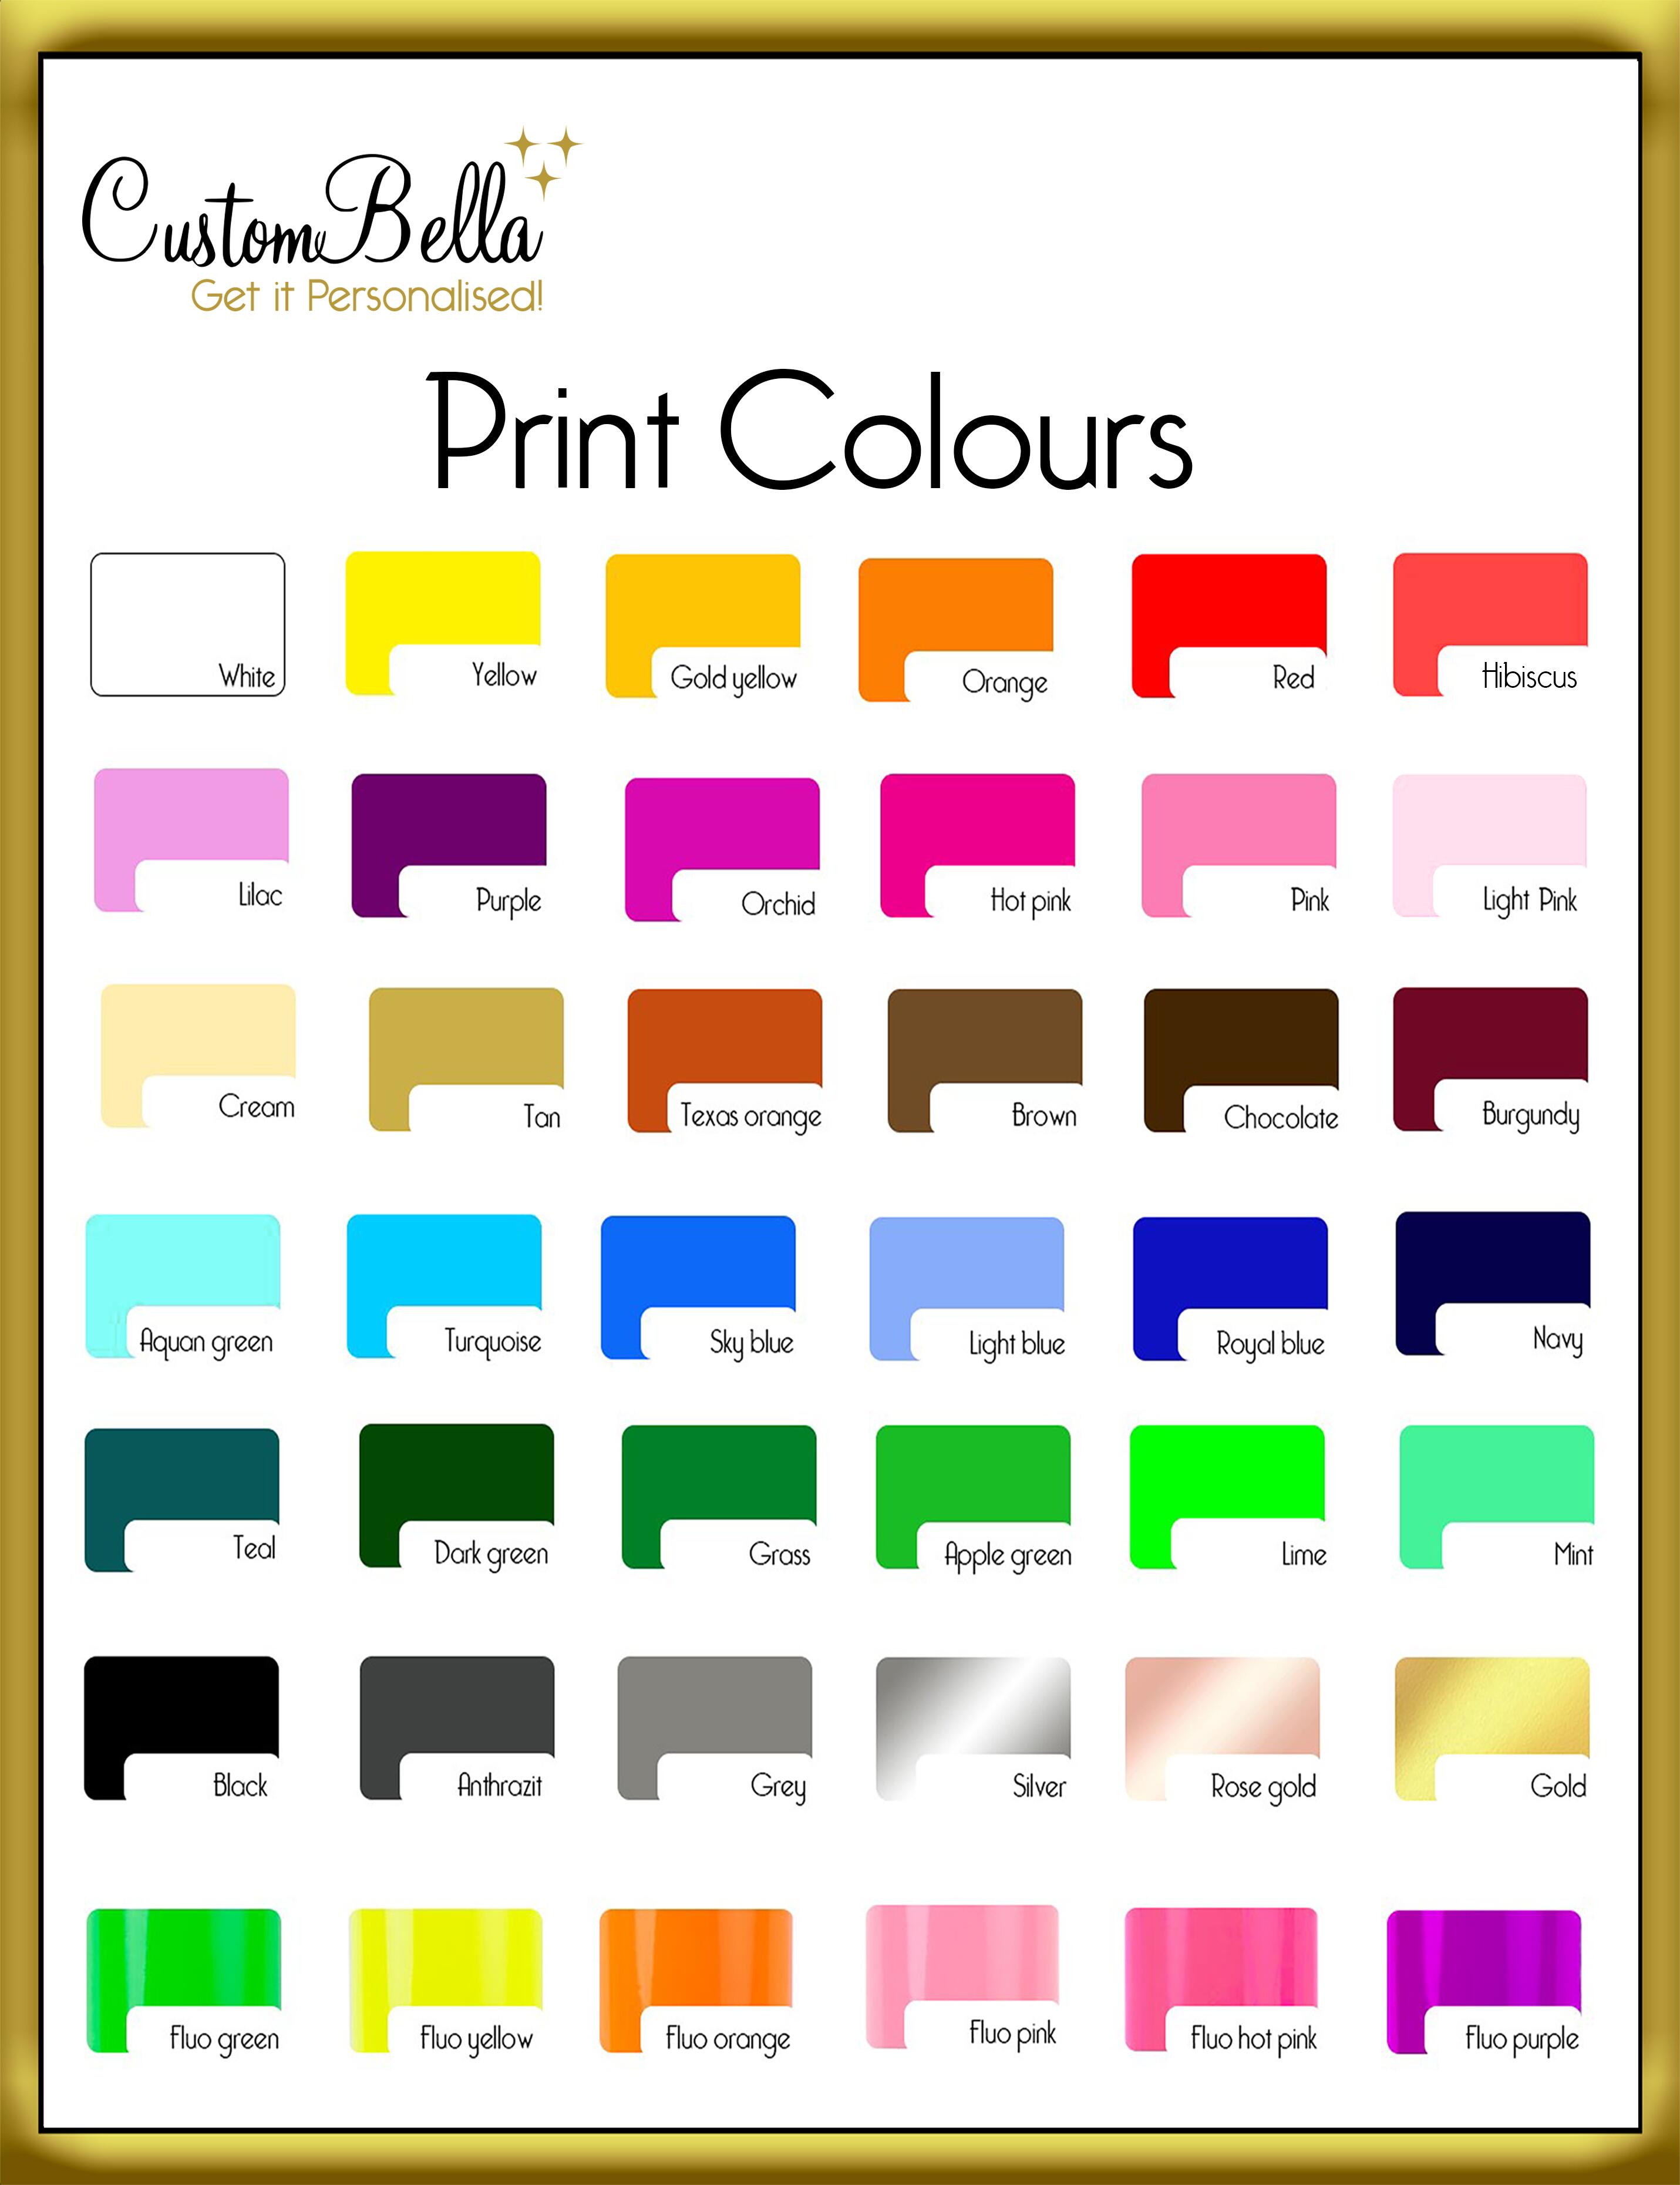 Custombella print colours to select to print